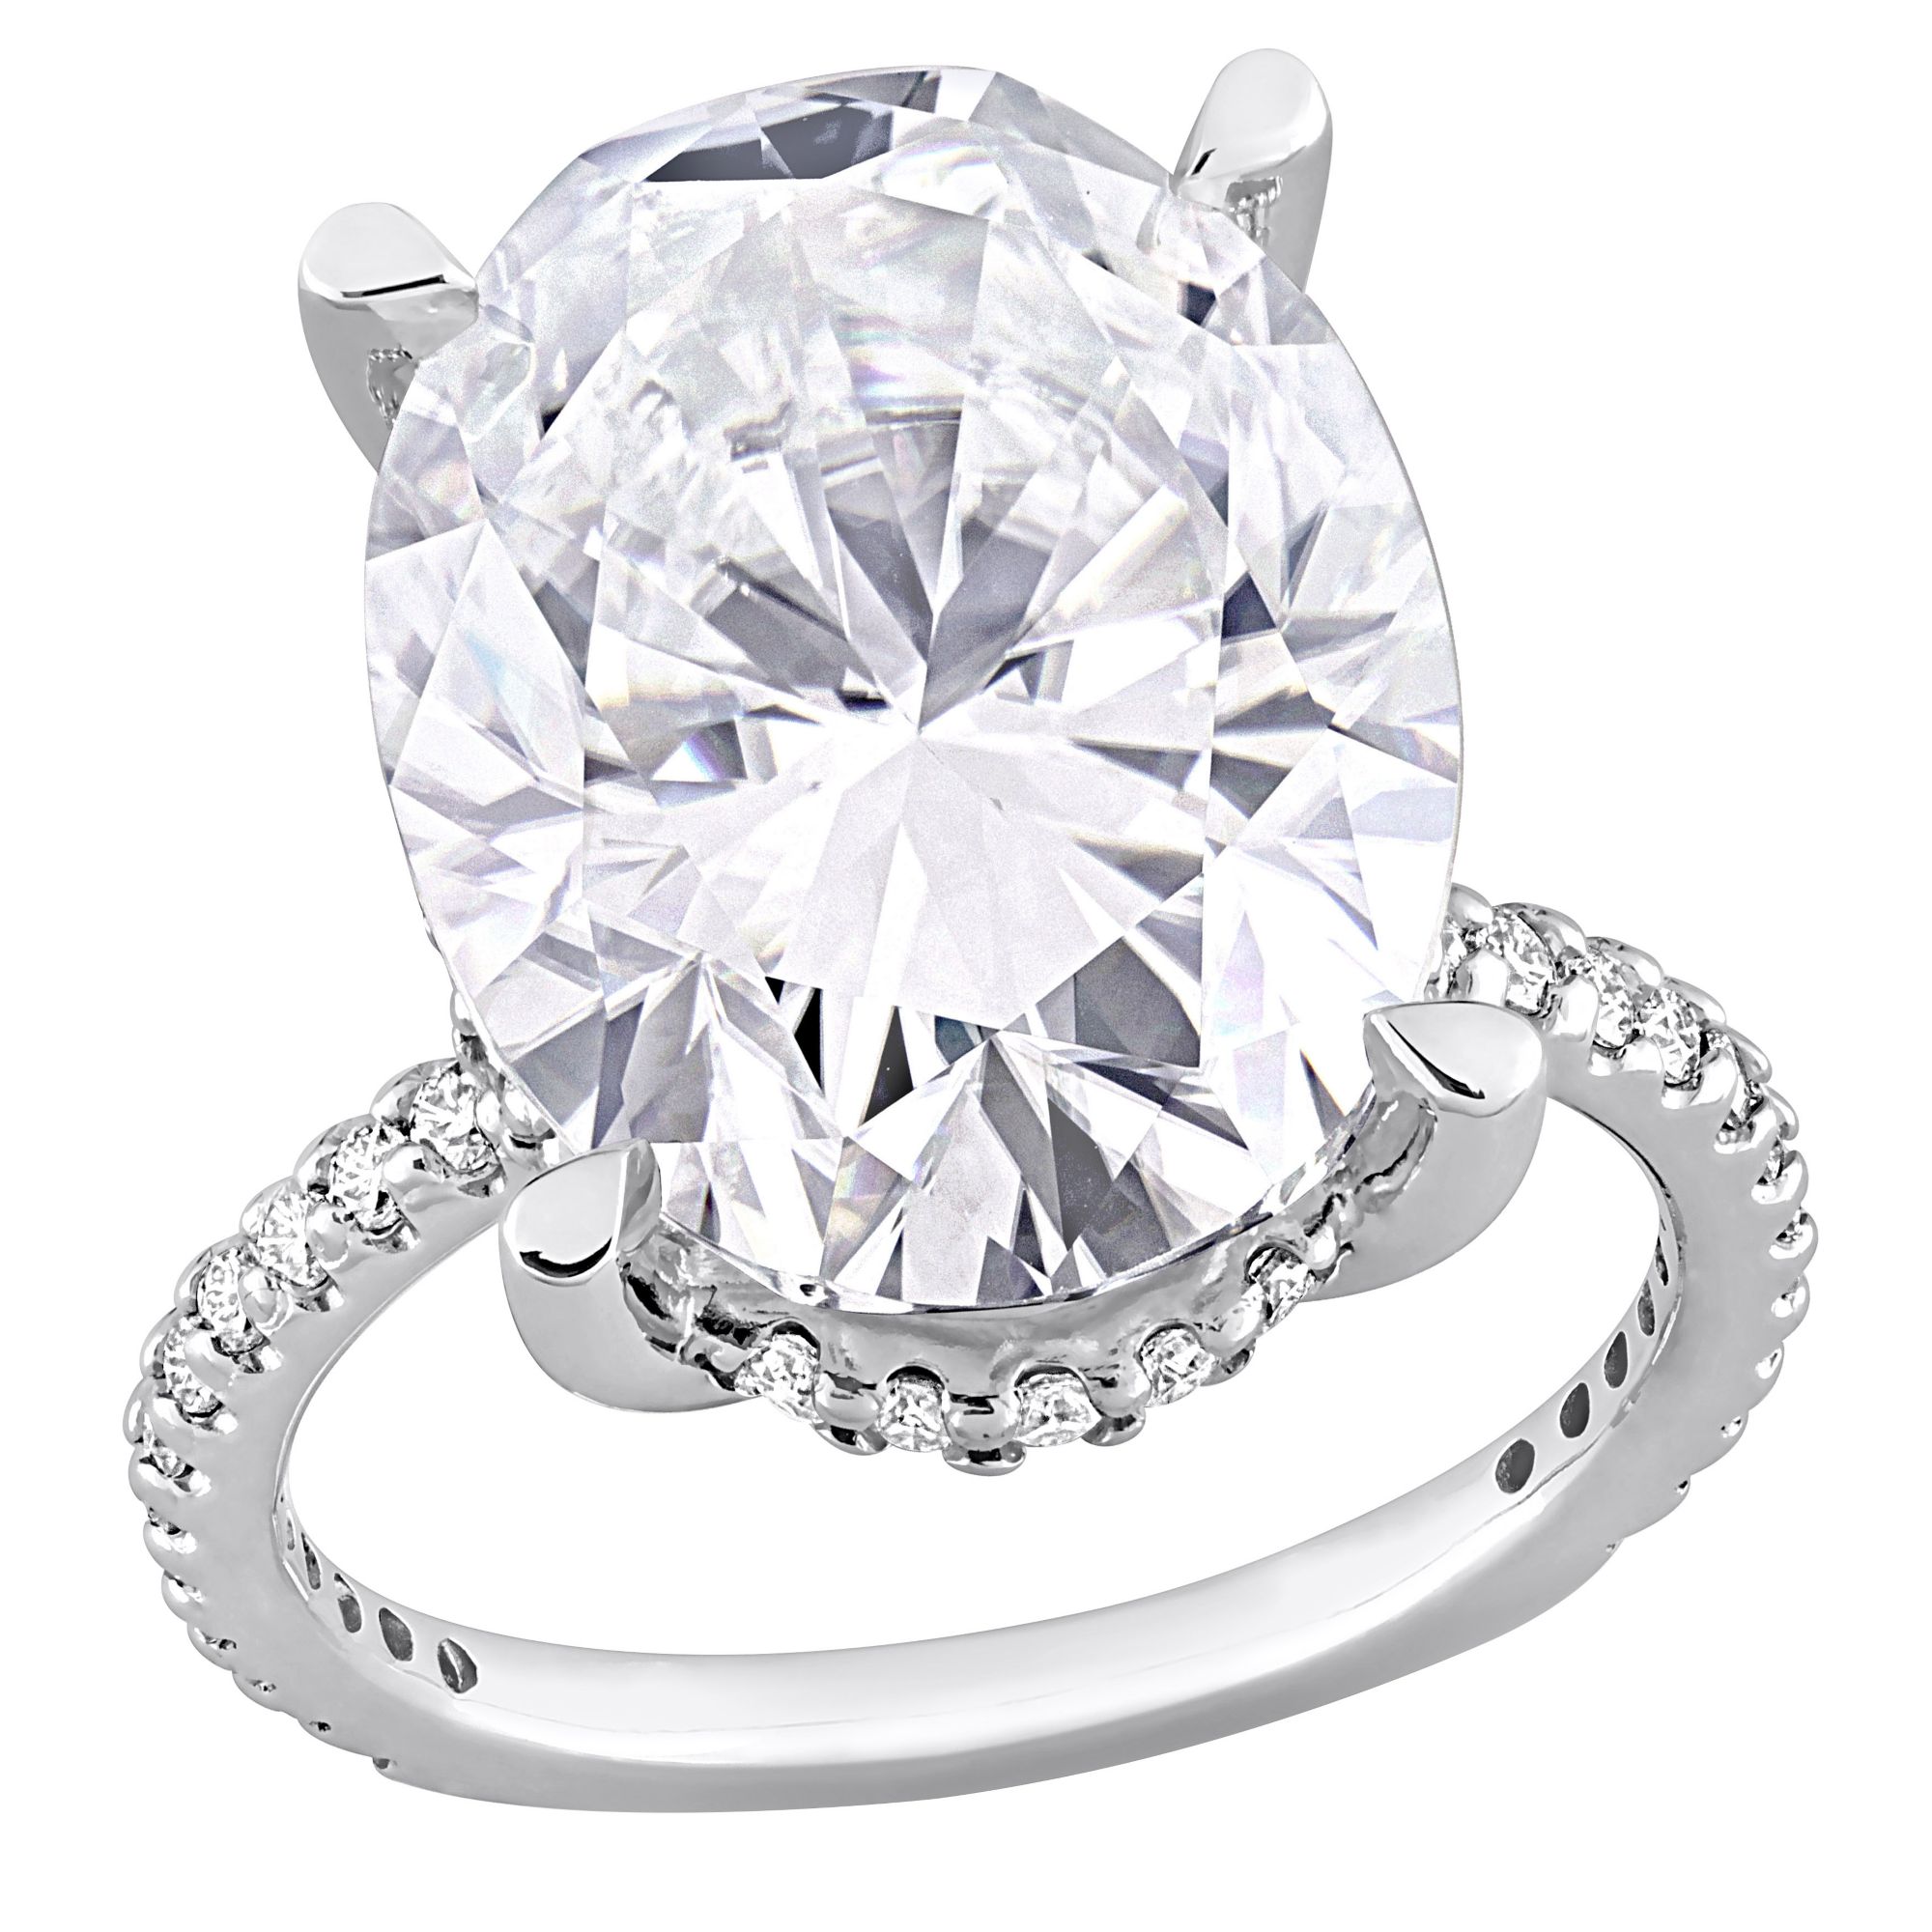 8.01 ct.  DEW Oval Moissanite Engagement Ring in 10k White Gold